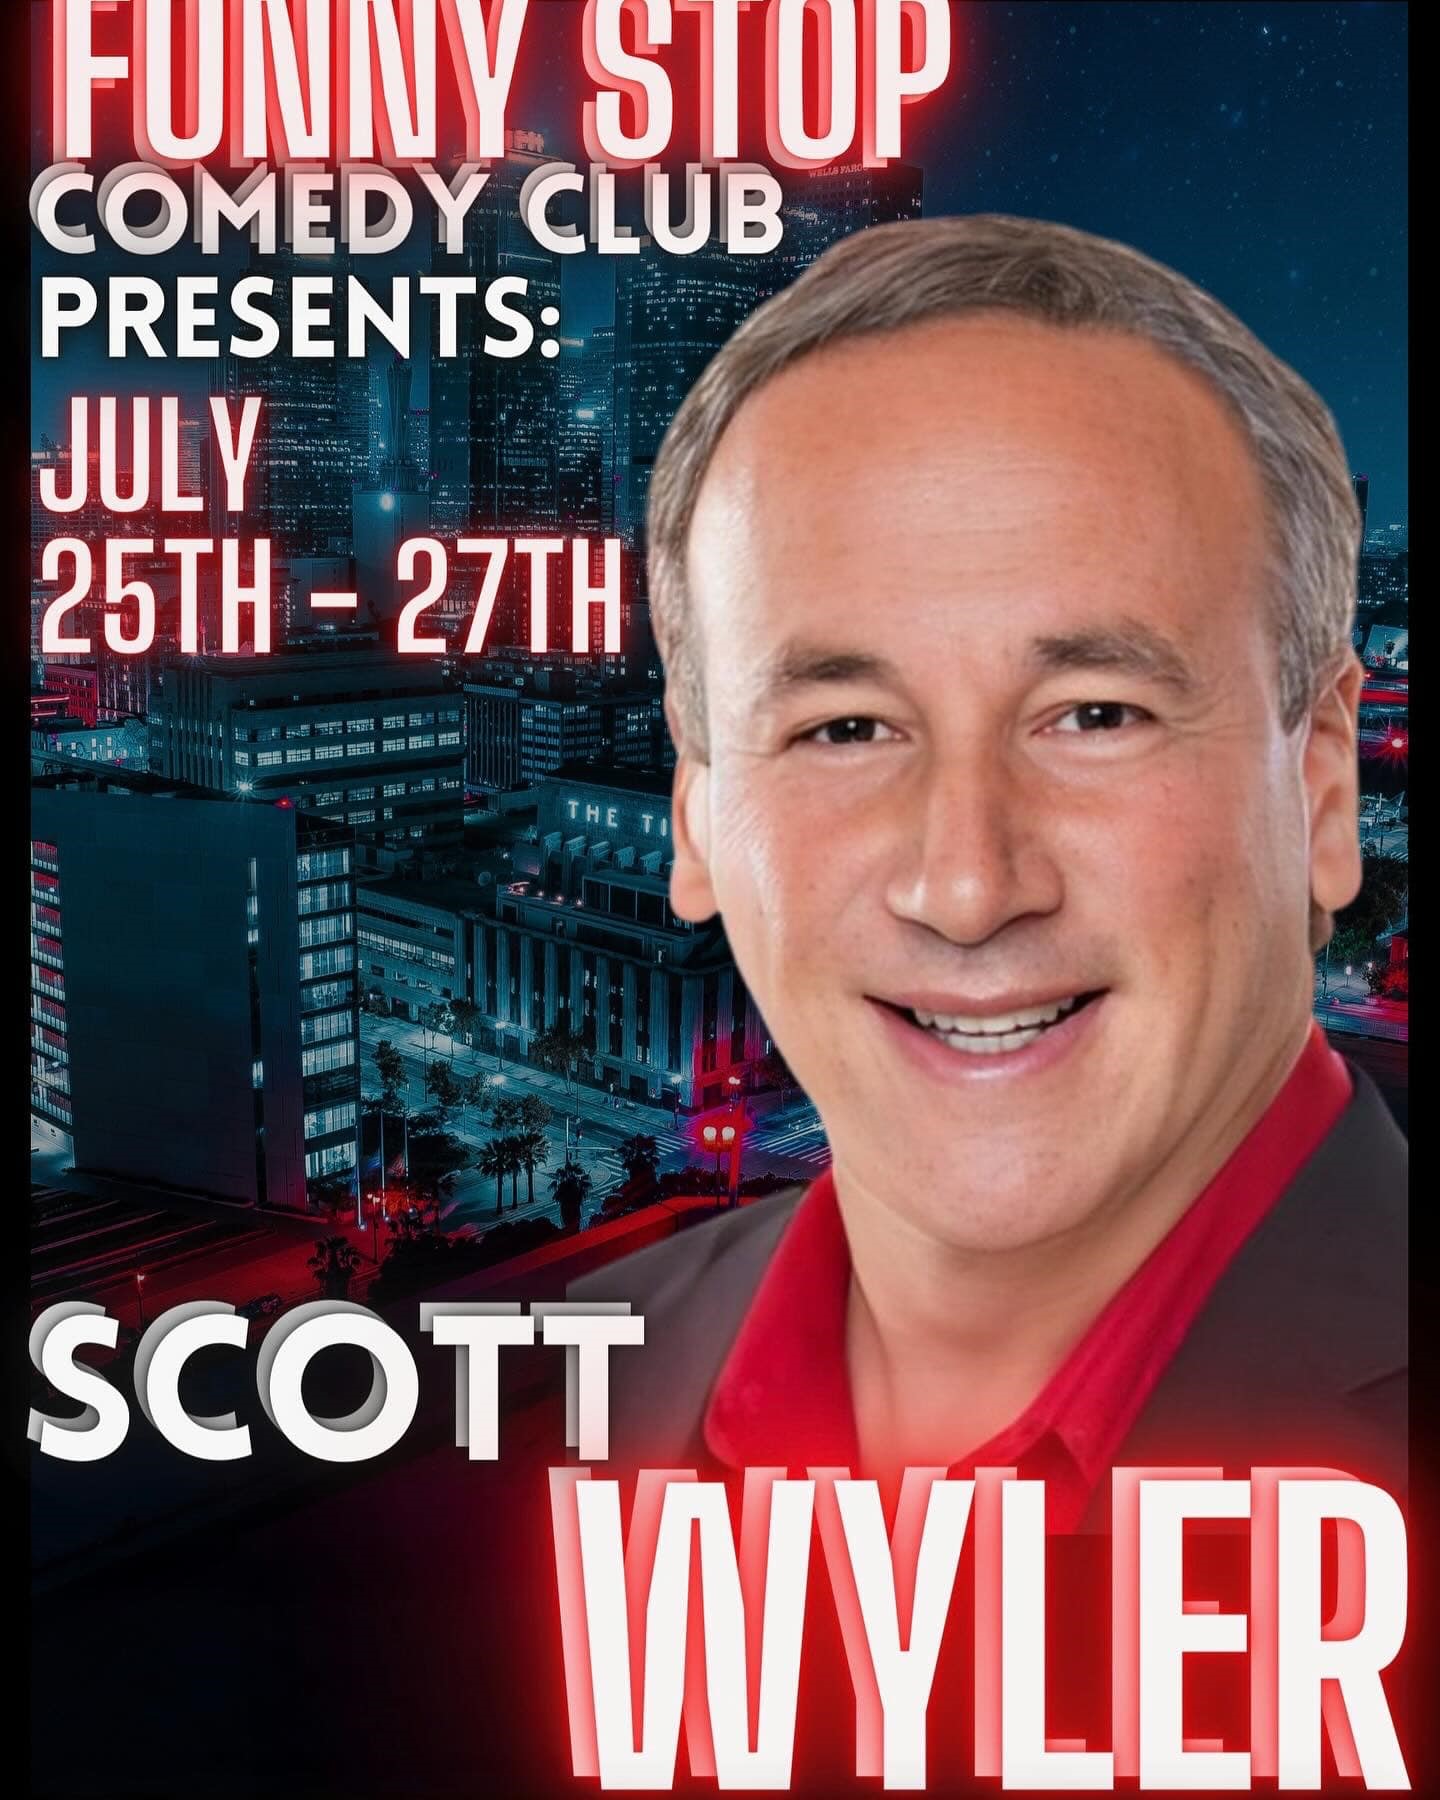 Scott Wyler - Thur. 8:00 PM Show Funny Stop Comedy Club on Jul 25, 20:00@Funny Stop Comedy Club - Buy tickets and Get information on Funny Stop funnystop.online